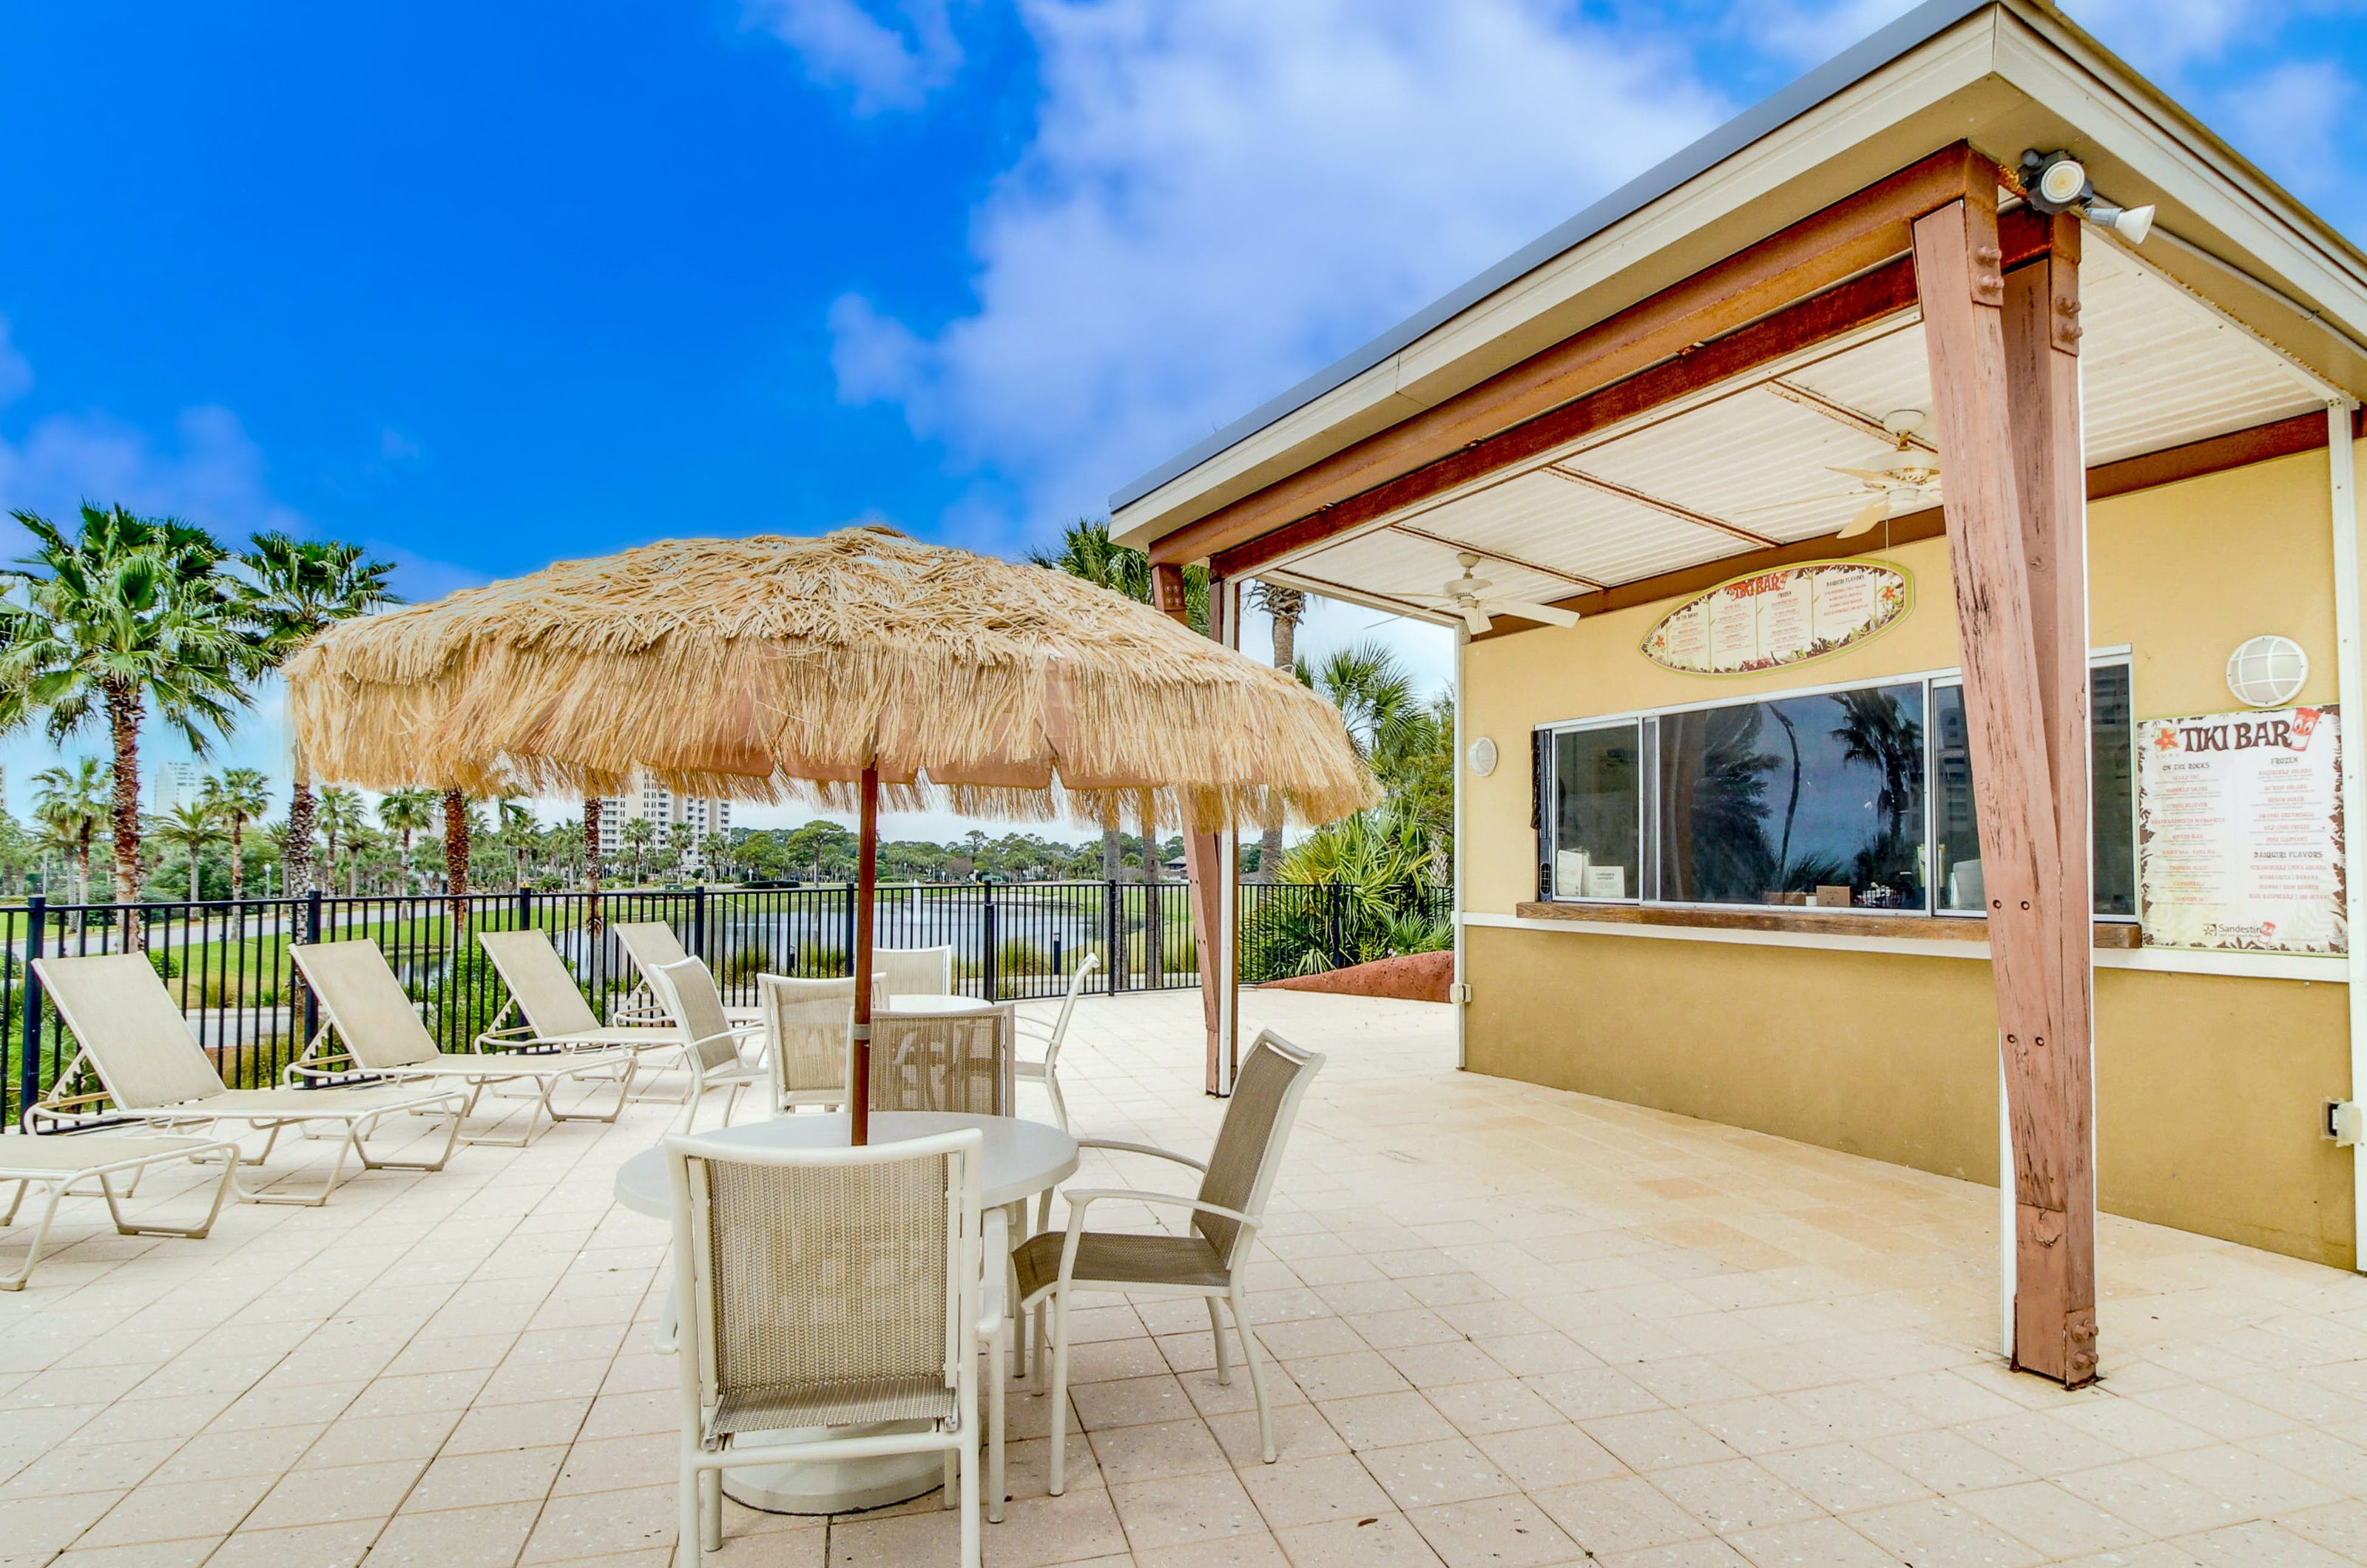 A poolside tiki hut bar with and patio seating and a lagoon featuring fountains nearby in the background